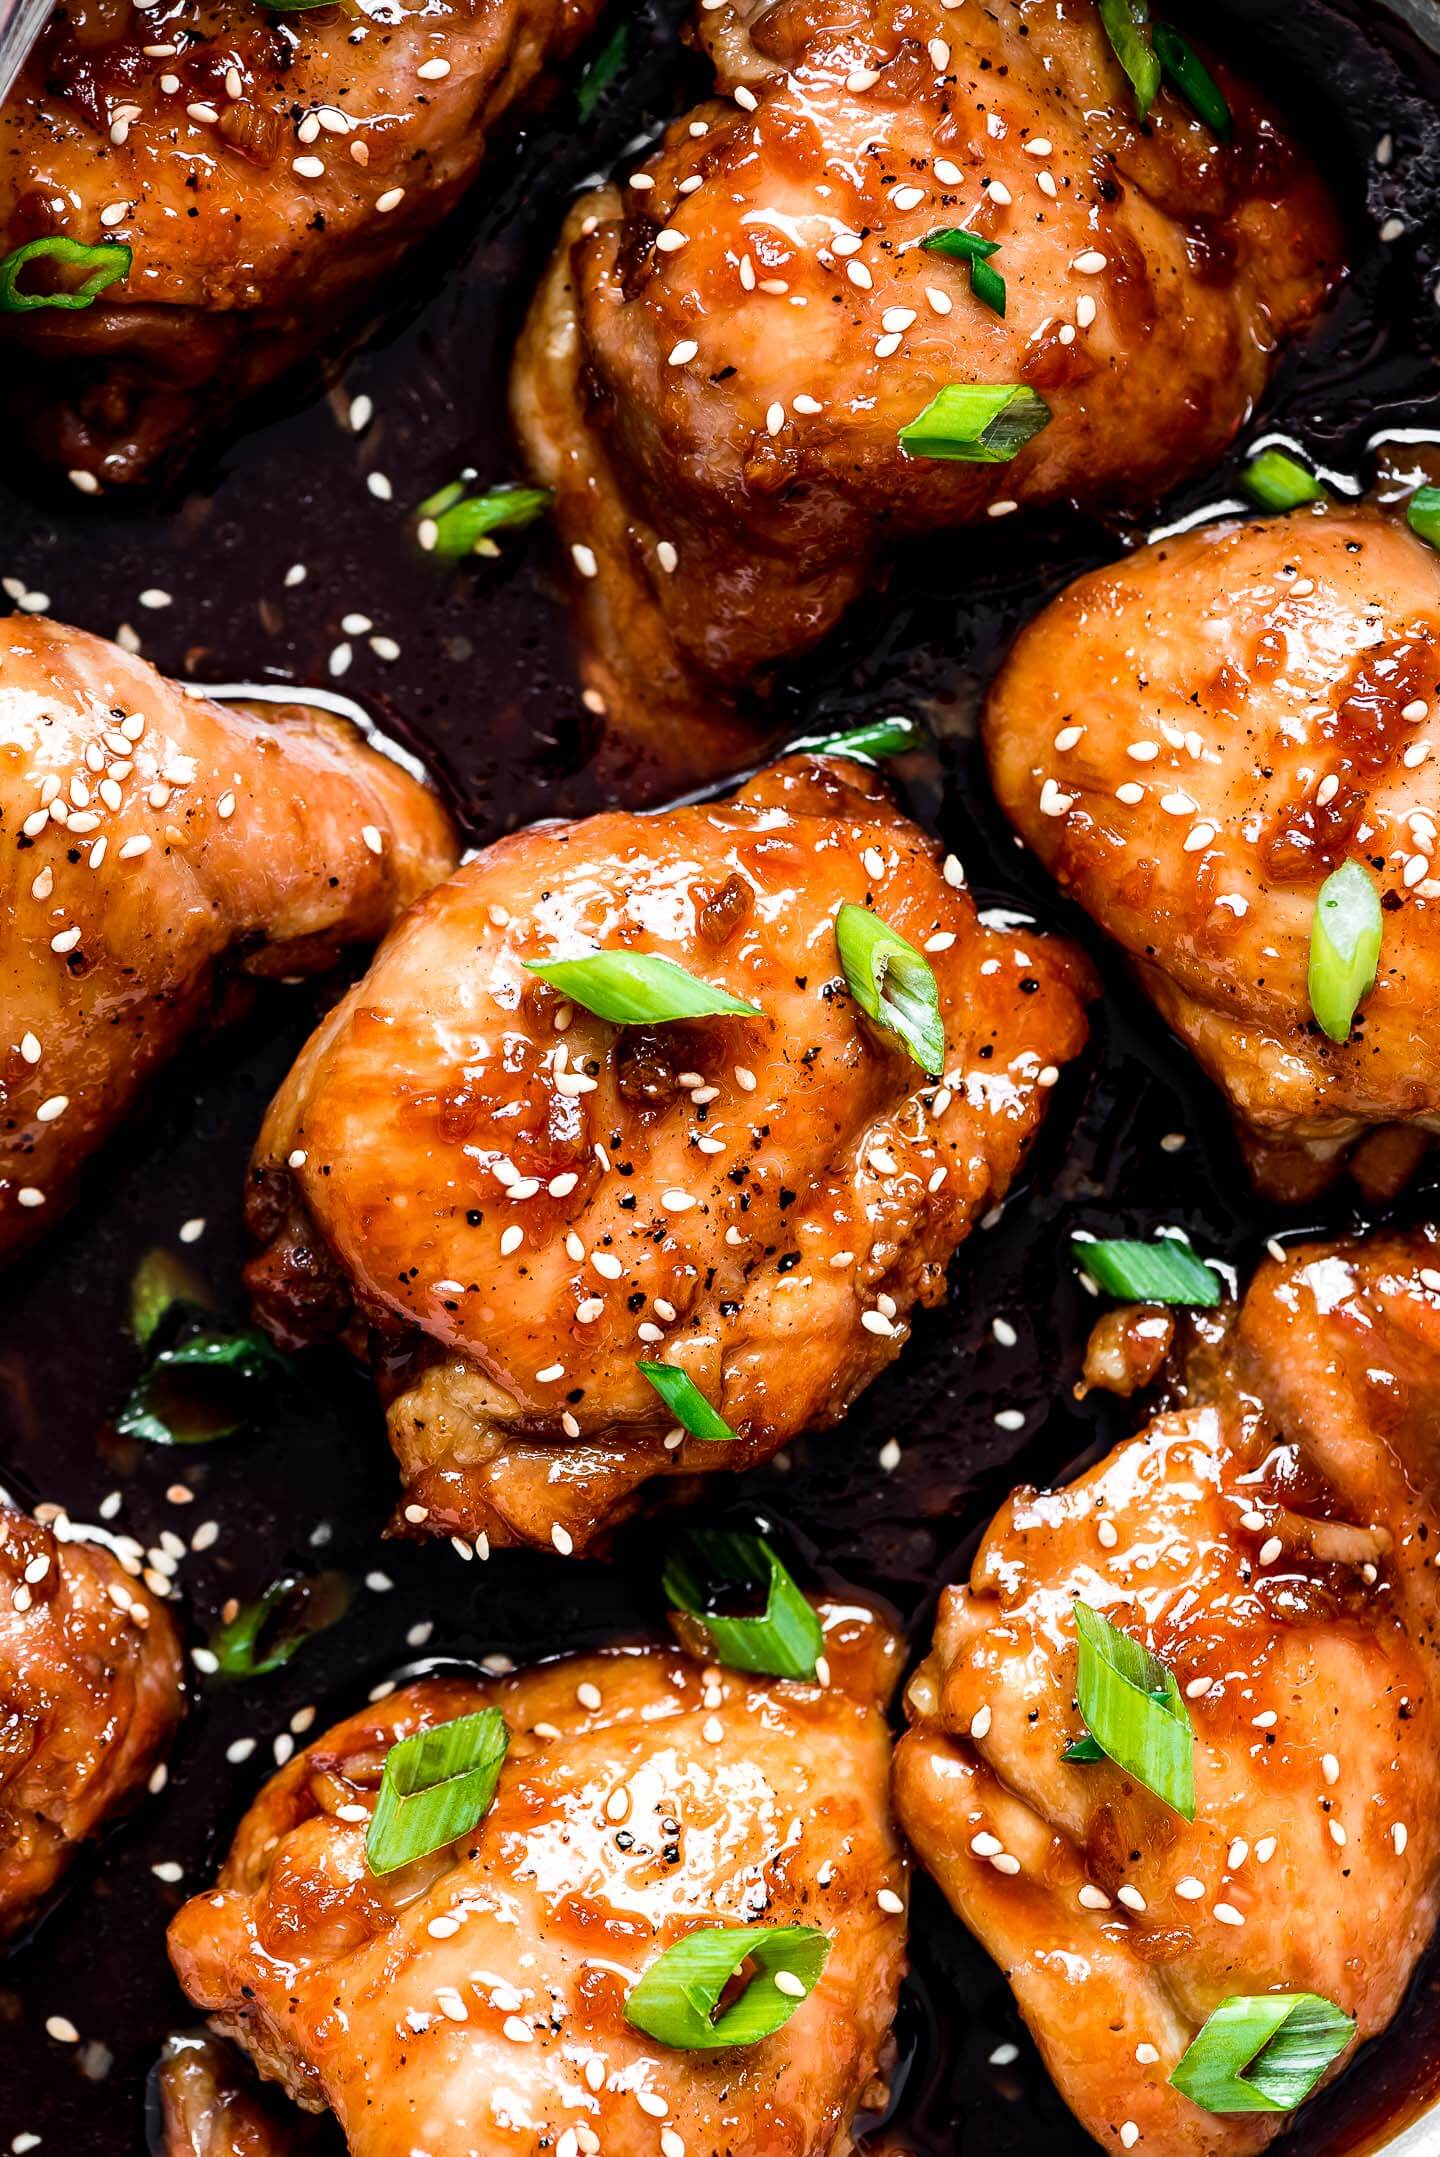 A close-up shot of glazed chicken thighs garnished with toasted sesame seeds, and green onions.